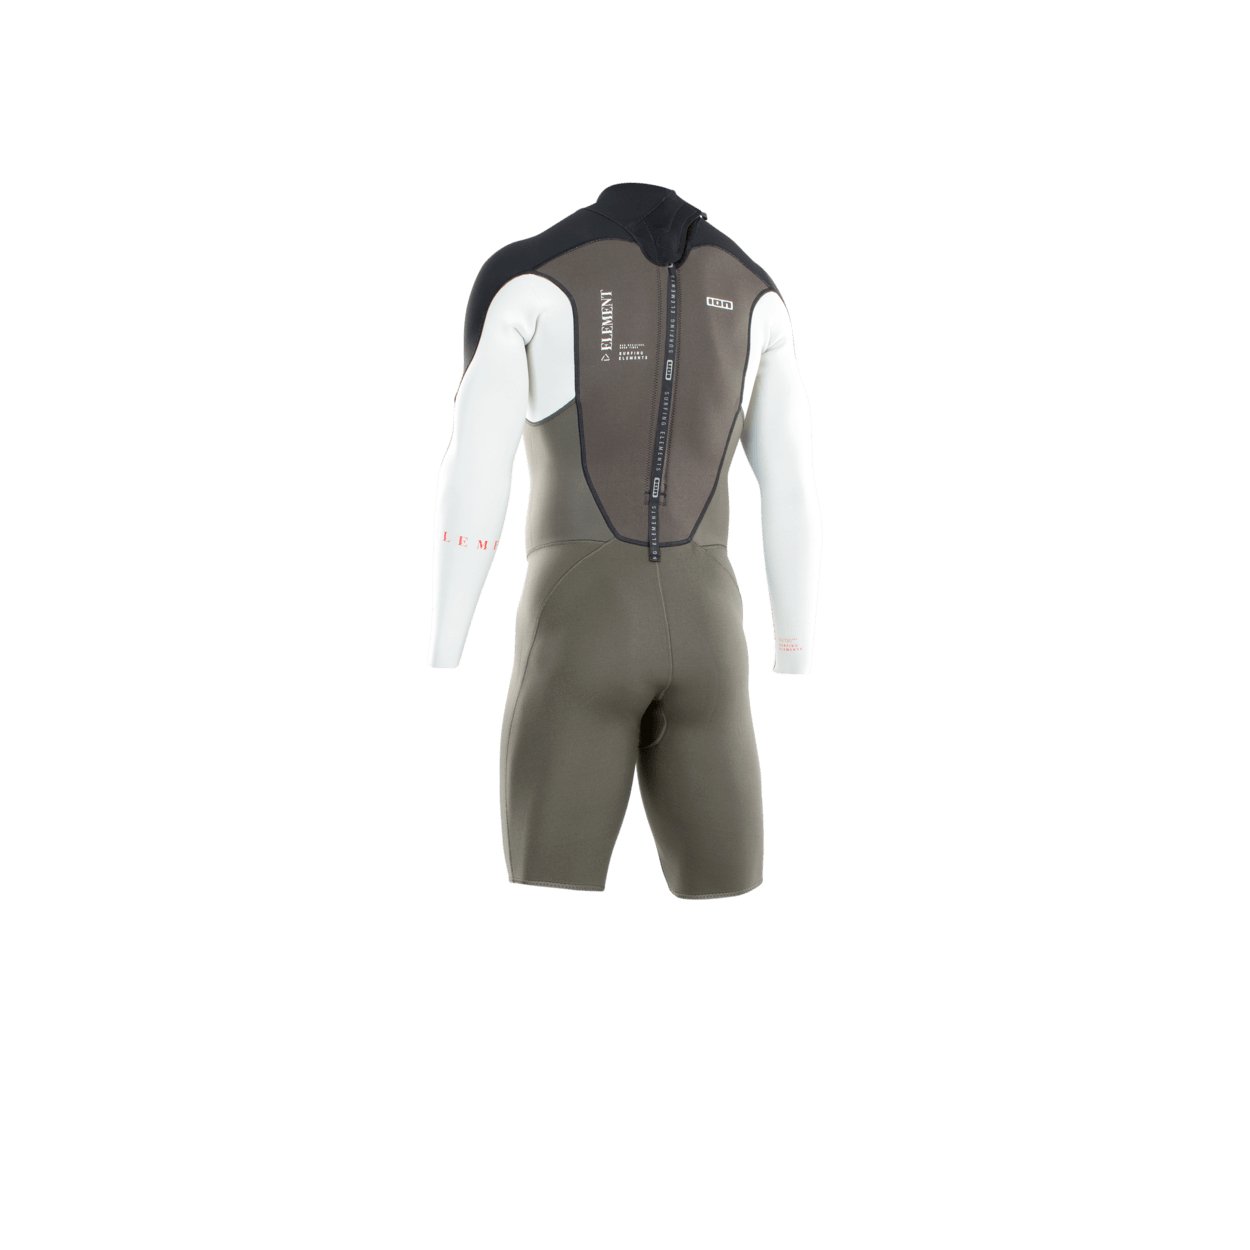 ION Men Wetsuit Element 2/2 Shorty Longsleeve Back Zip 2022 - Worthing Watersports - 9008415951574 - Wetsuits - ION Water